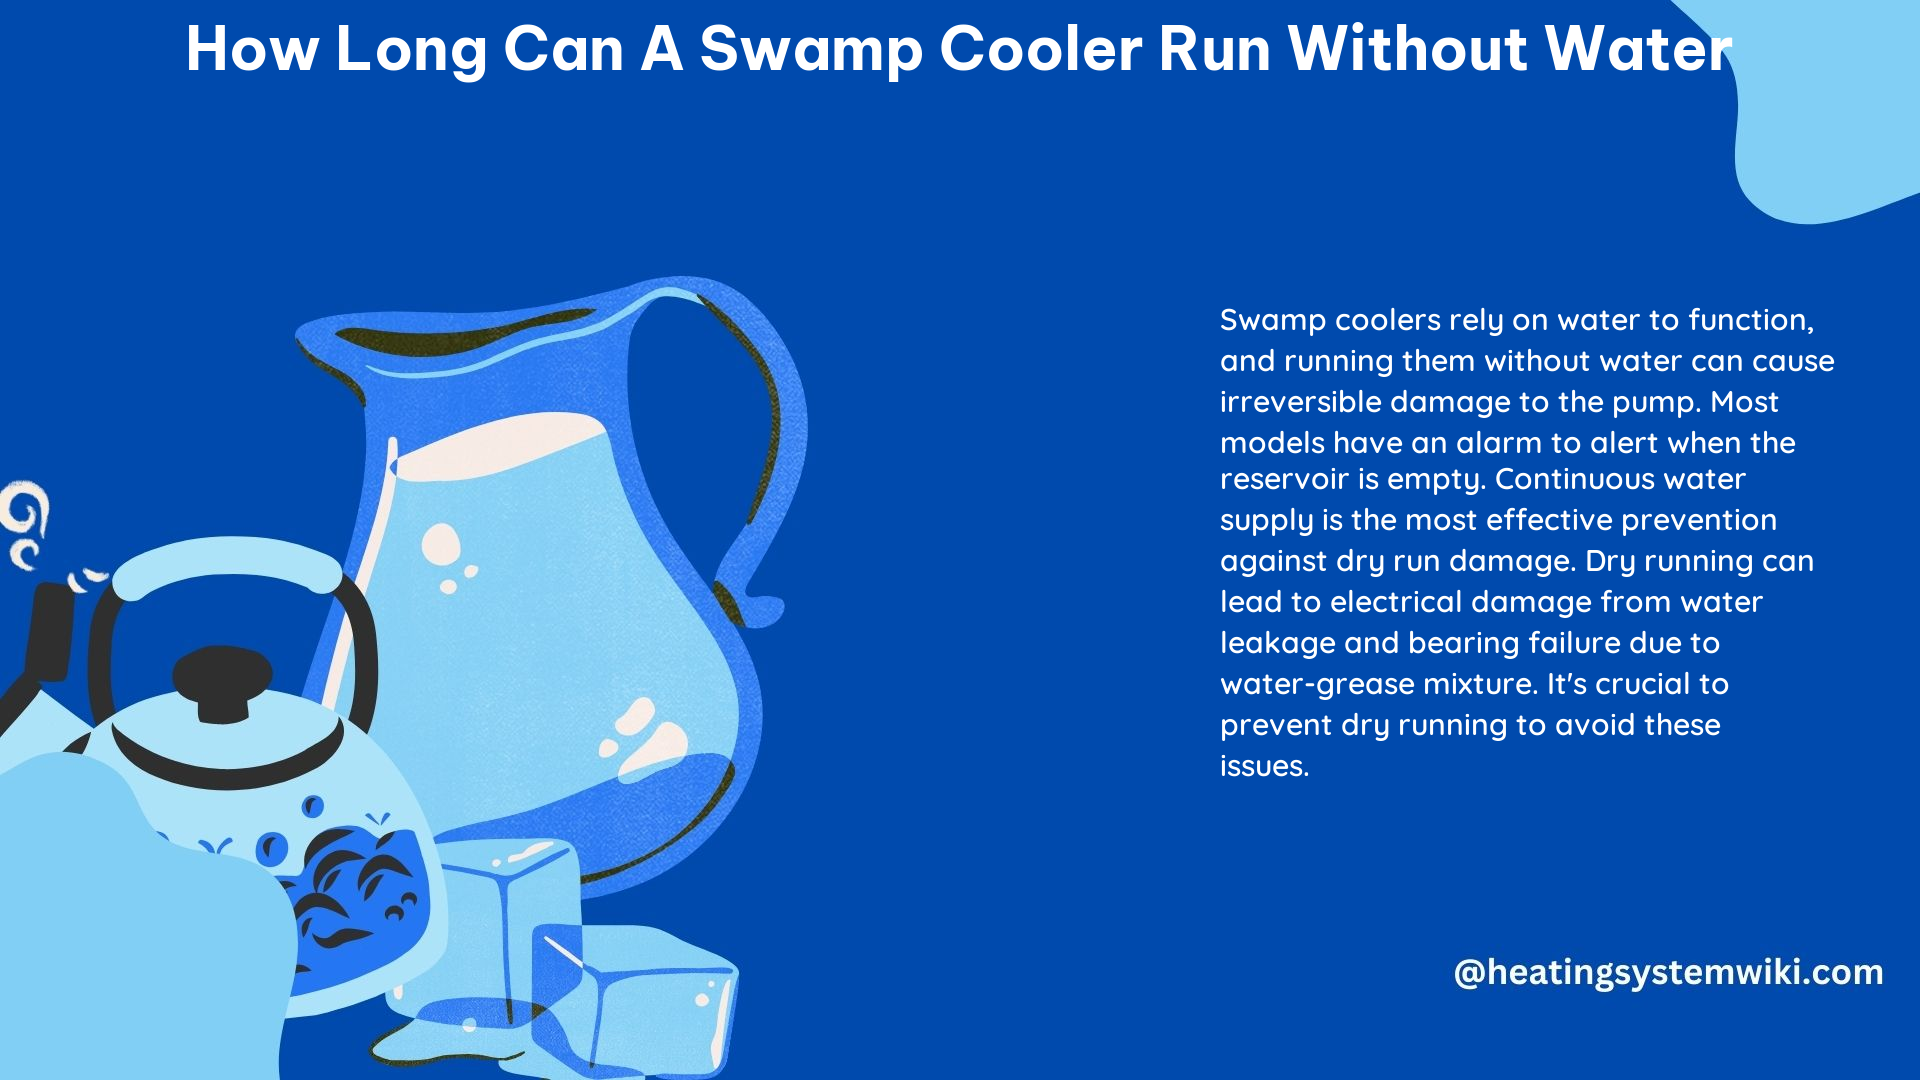 How Long Can a Swamp Cooler Run Without Water